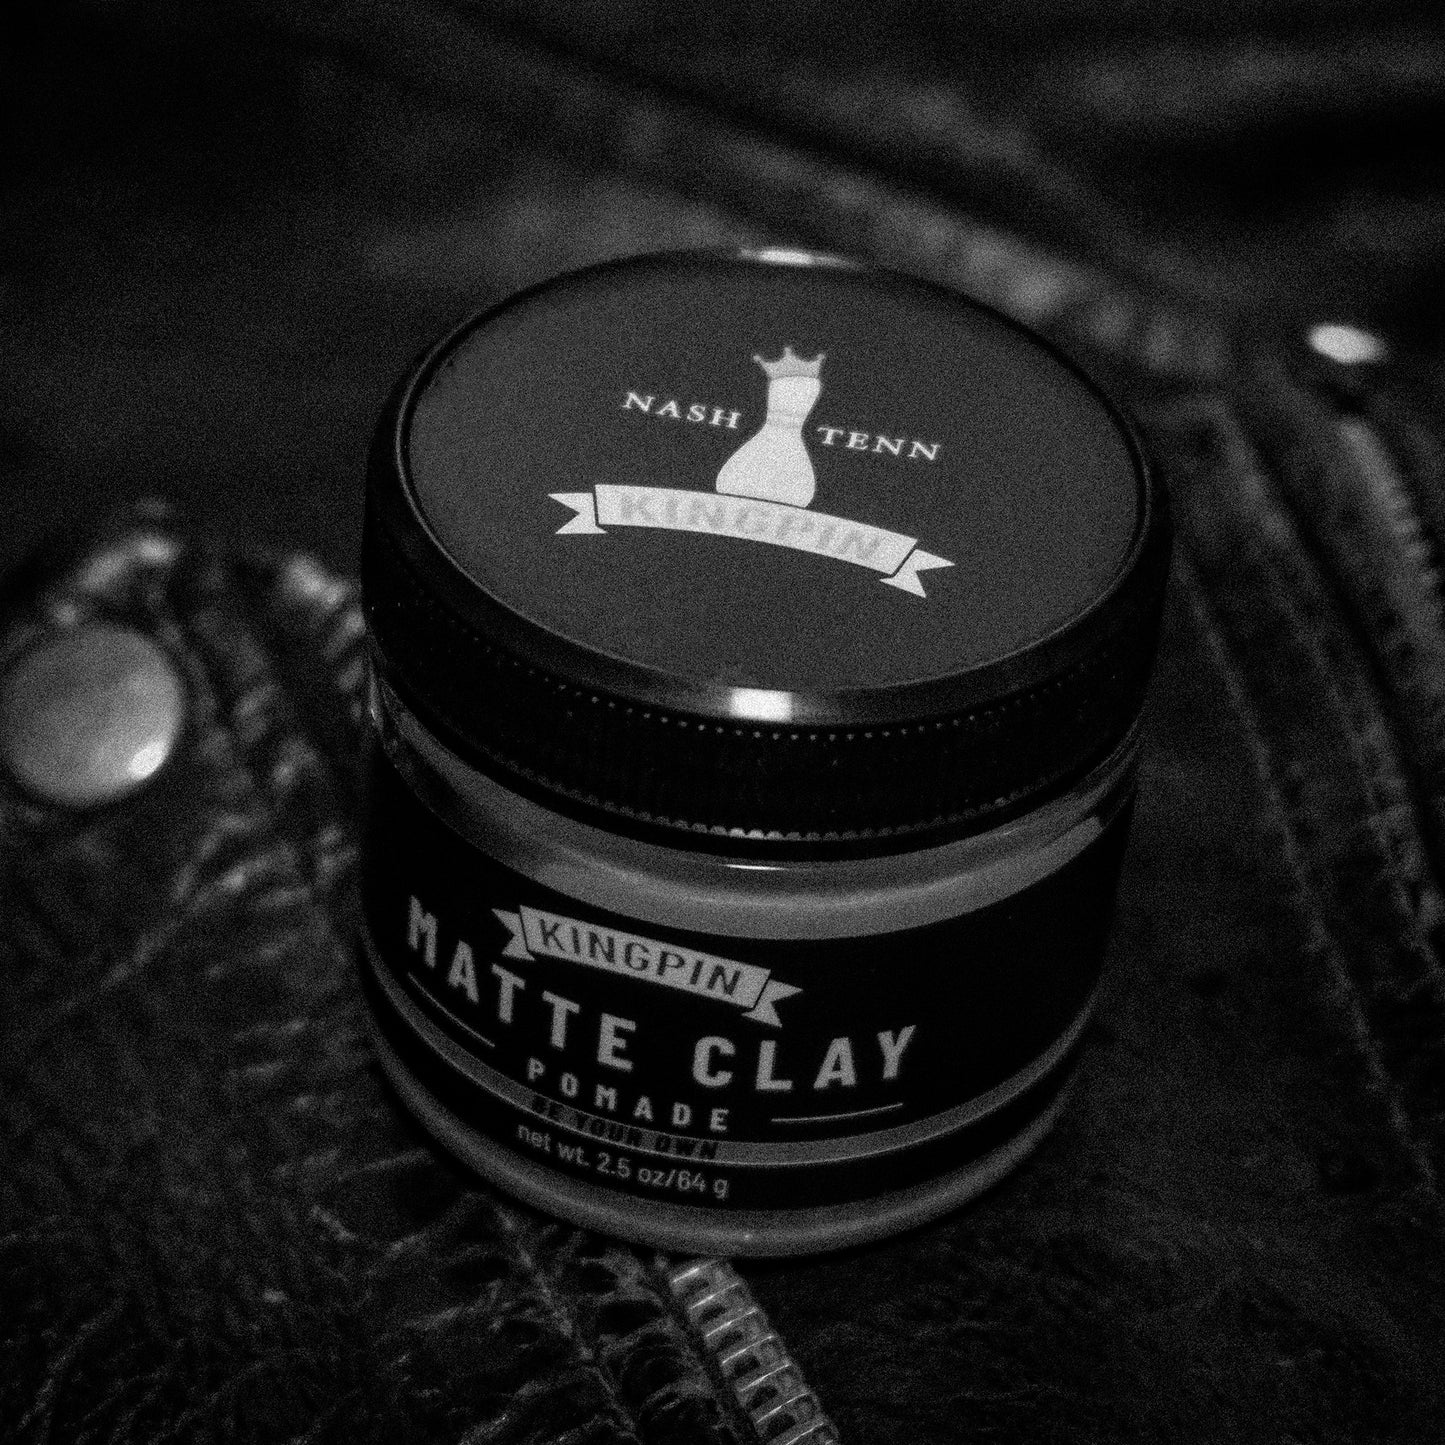 Matte Clay Pomade